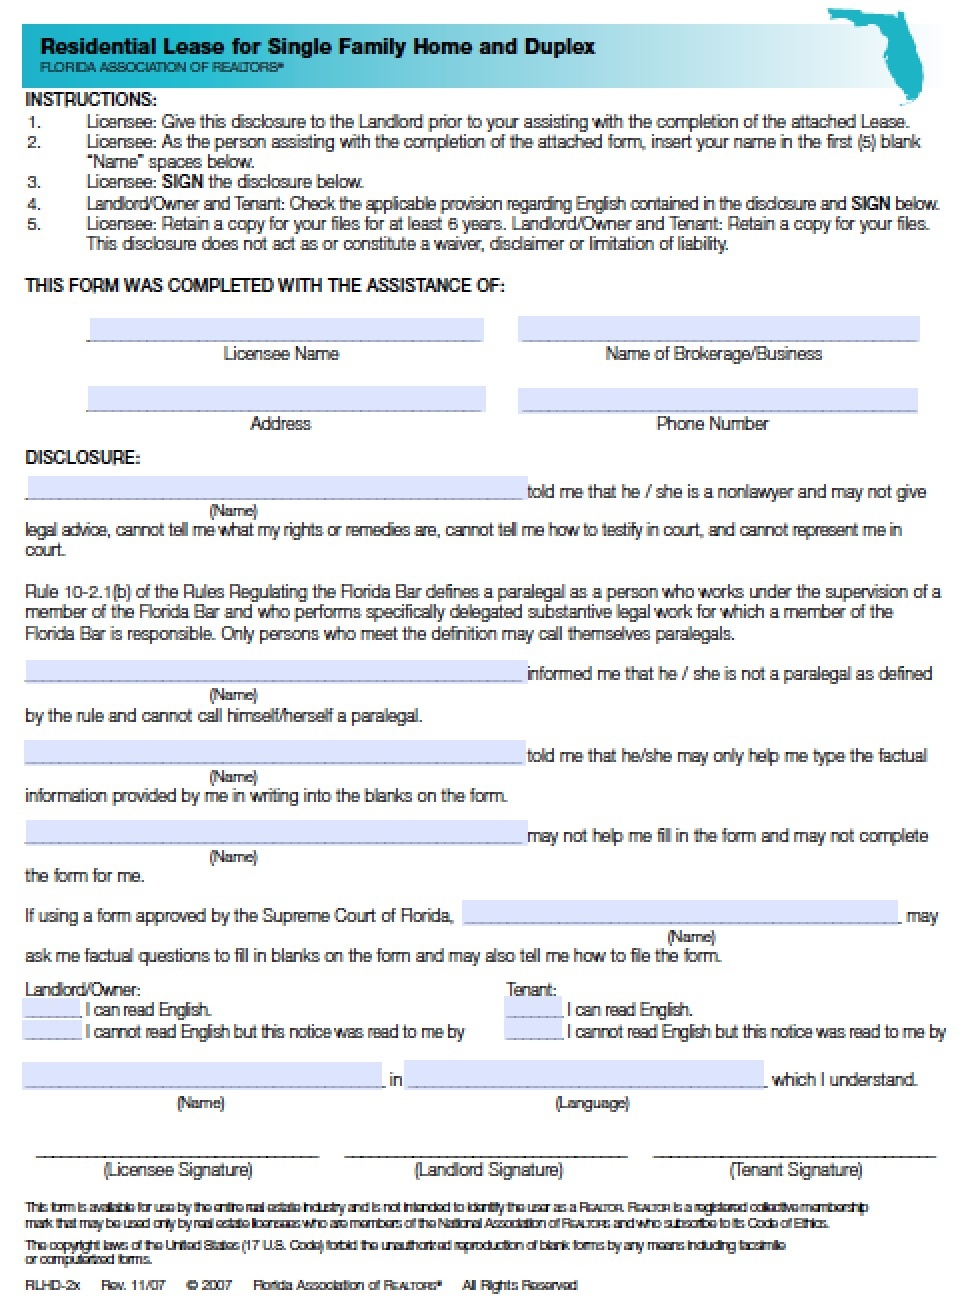 Download Florida Rental Lease Agreement Forms And Templates | Pdf - Free Printable Florida Residential Lease Agreement